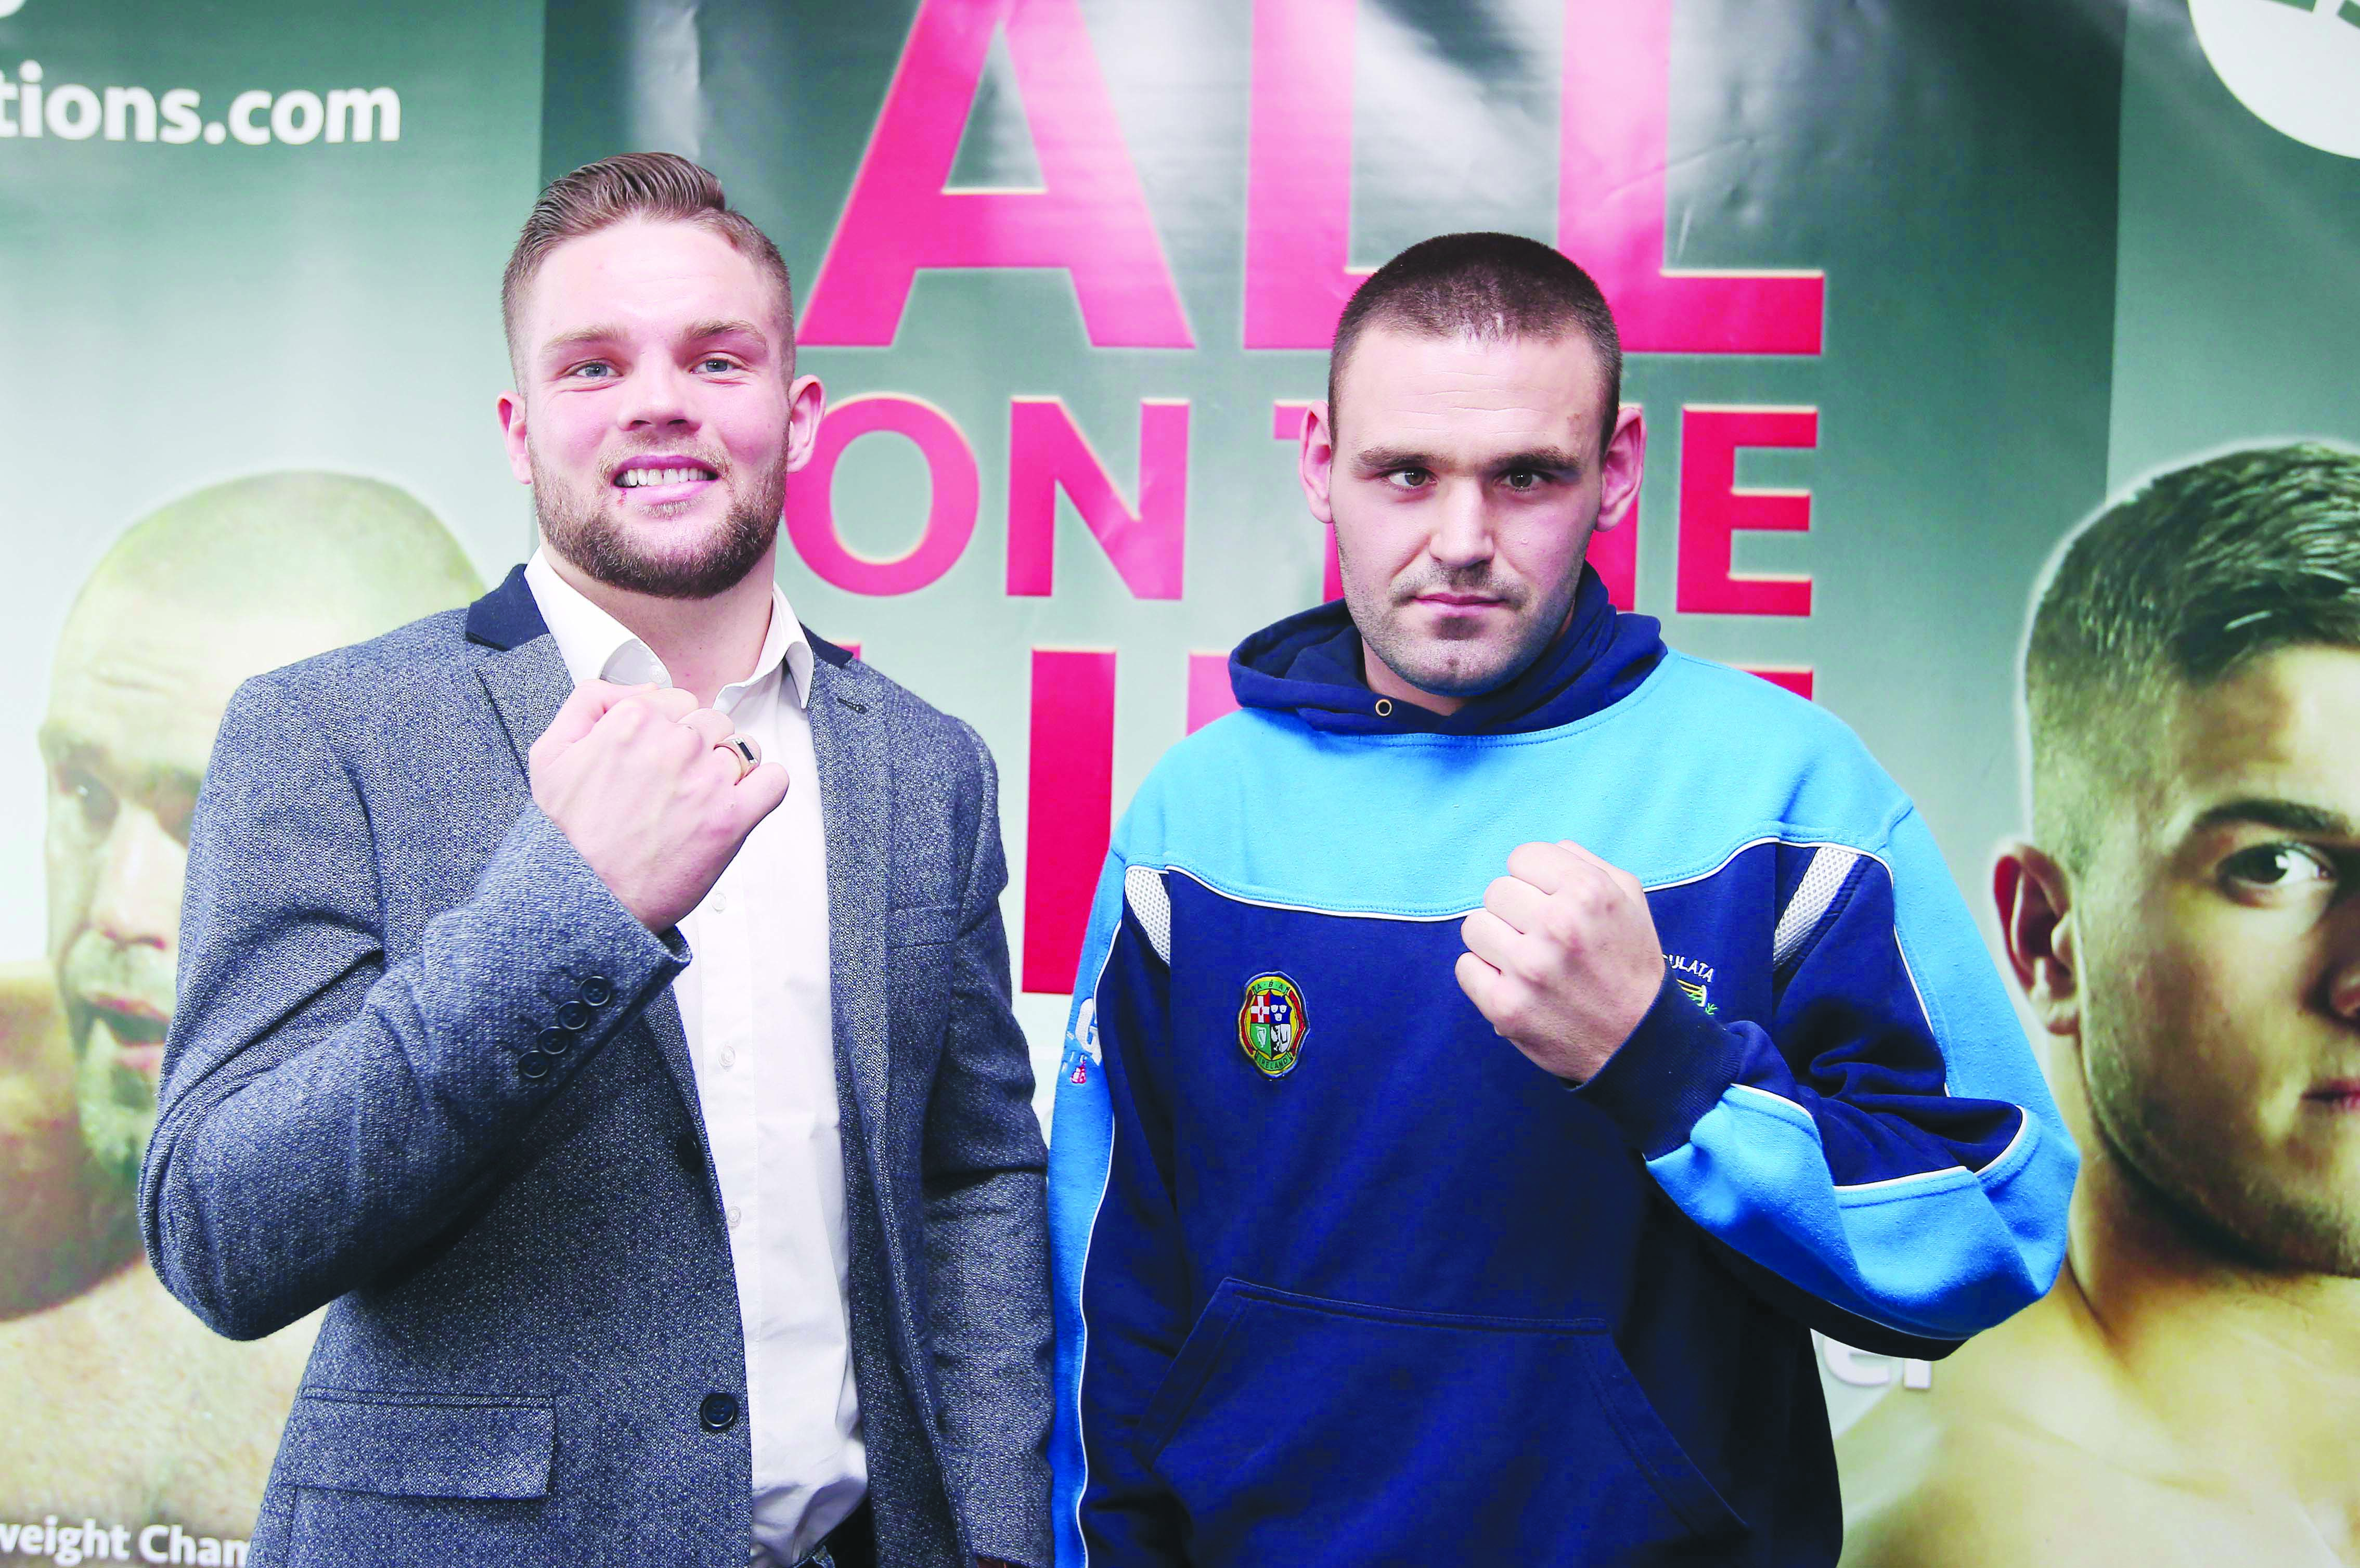 Conrad Cummings and Alfredo Meli meet for the Celtic middleweight title in a potential fight of the year on Friday\nPicture by Jonathan Porter/PressEye